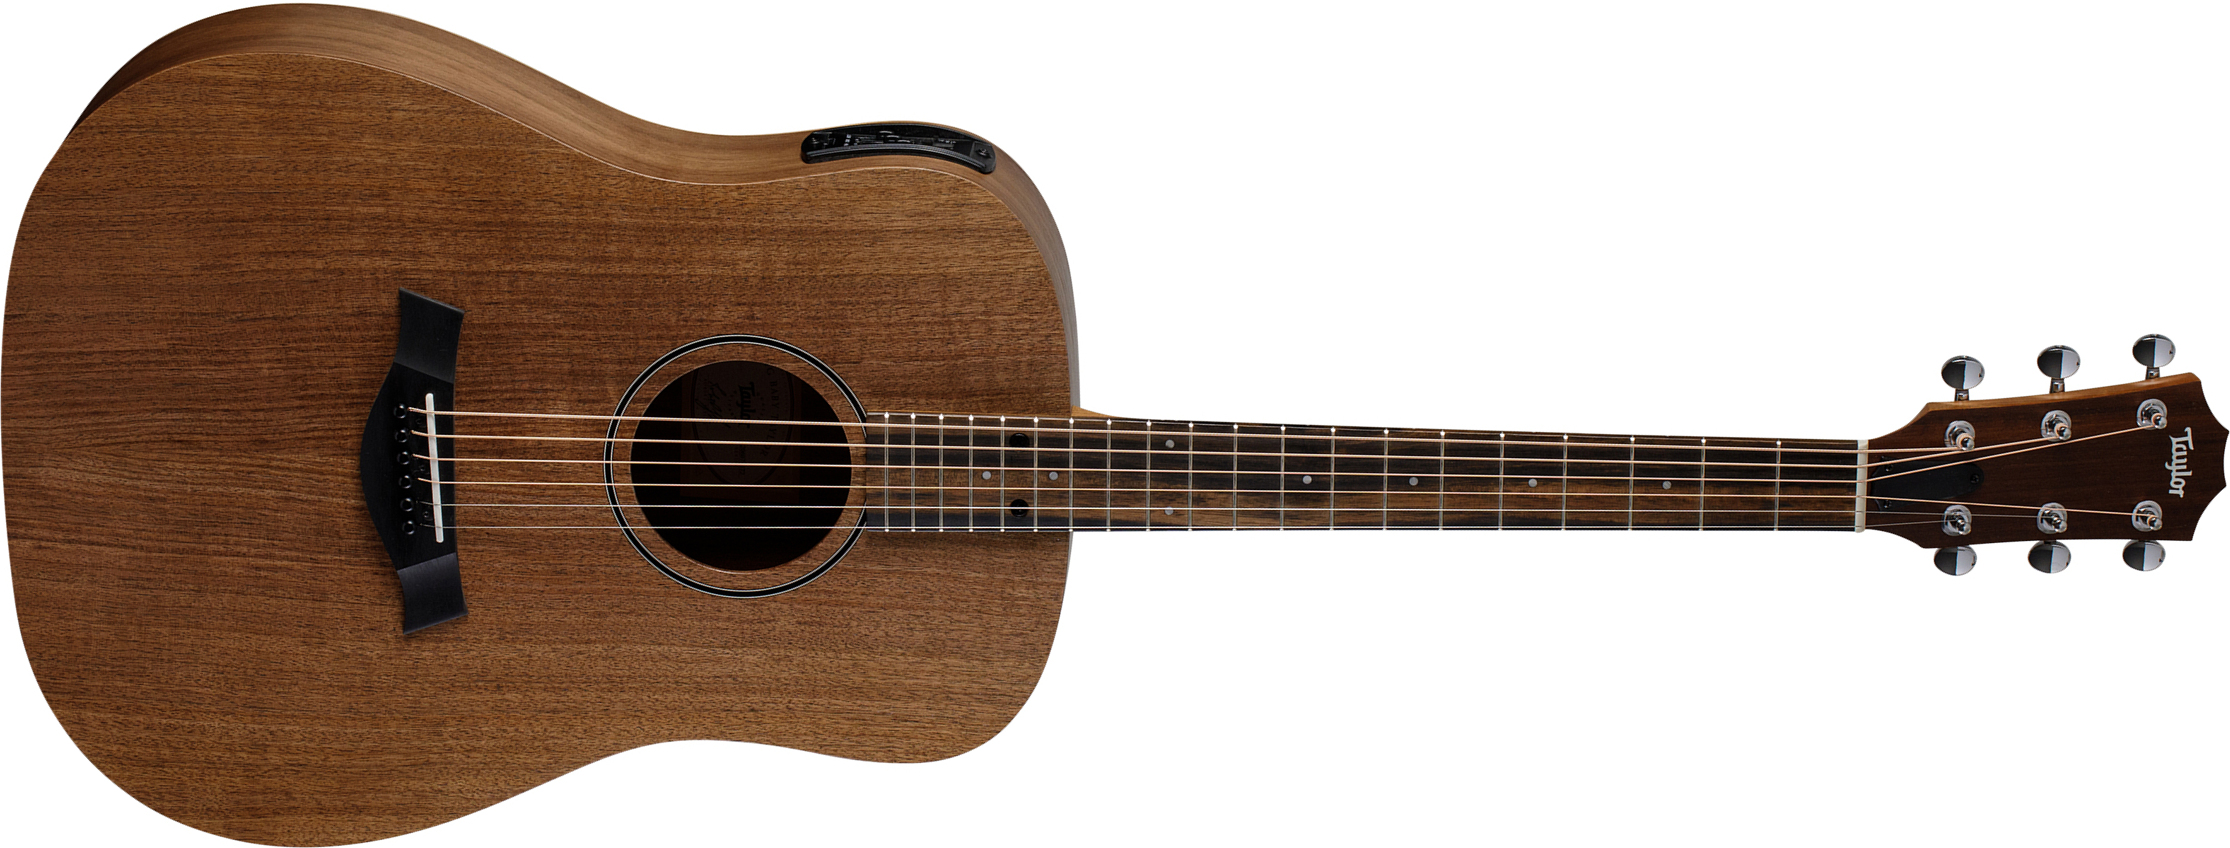 Taylor Big Baby Bbte Walnut/walnut Dreadnought 15/16 Tout Noyer Eb Es-b - Natural - Travel acoustic guitar - Main picture